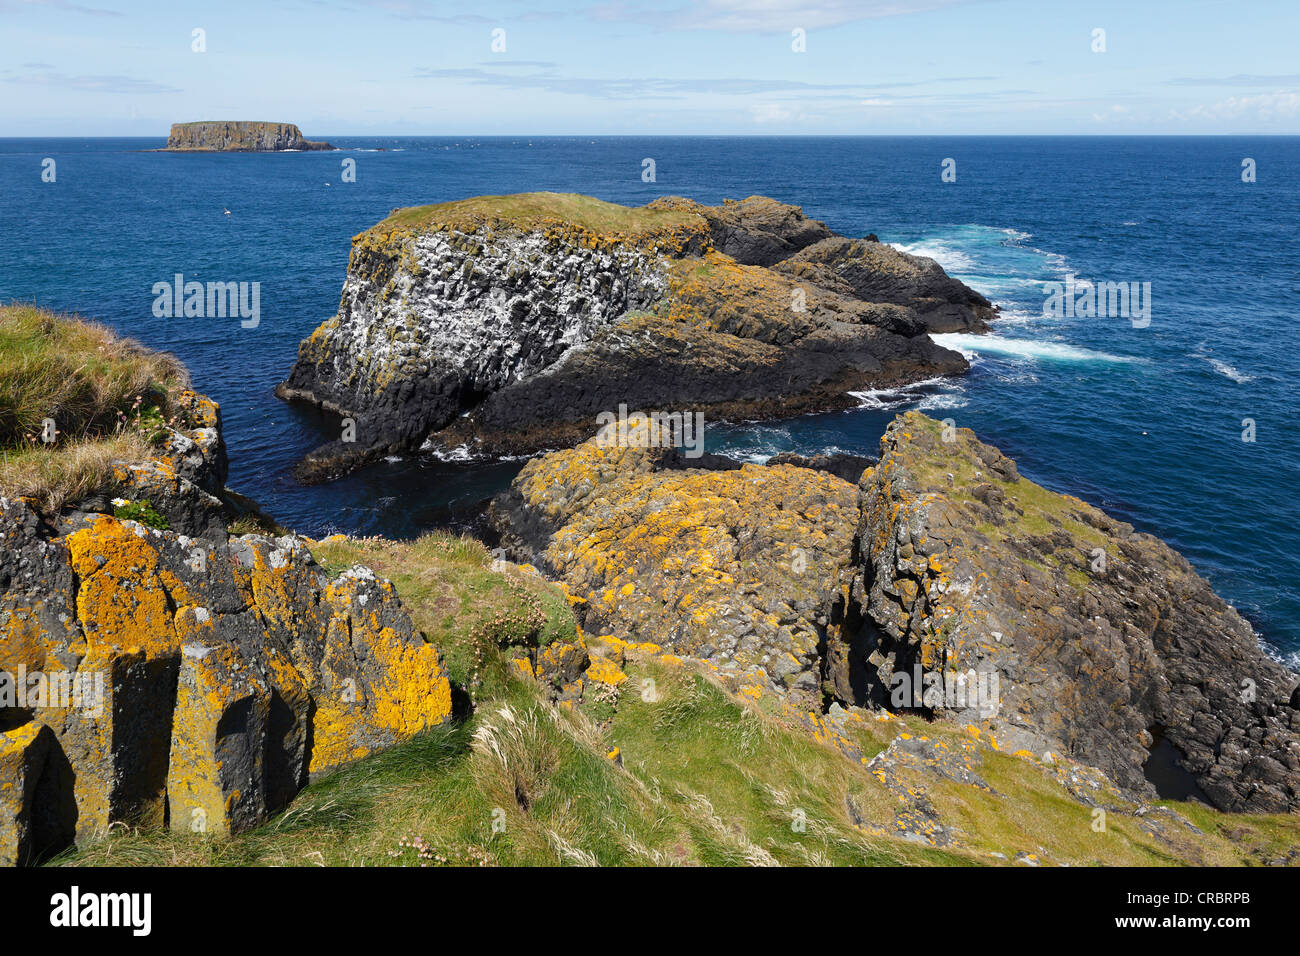 View from the island of Carrick-a-Reed to Sheep Island, County Antrim, Northern Ireland, United Kingdom, Europe Stock Photo